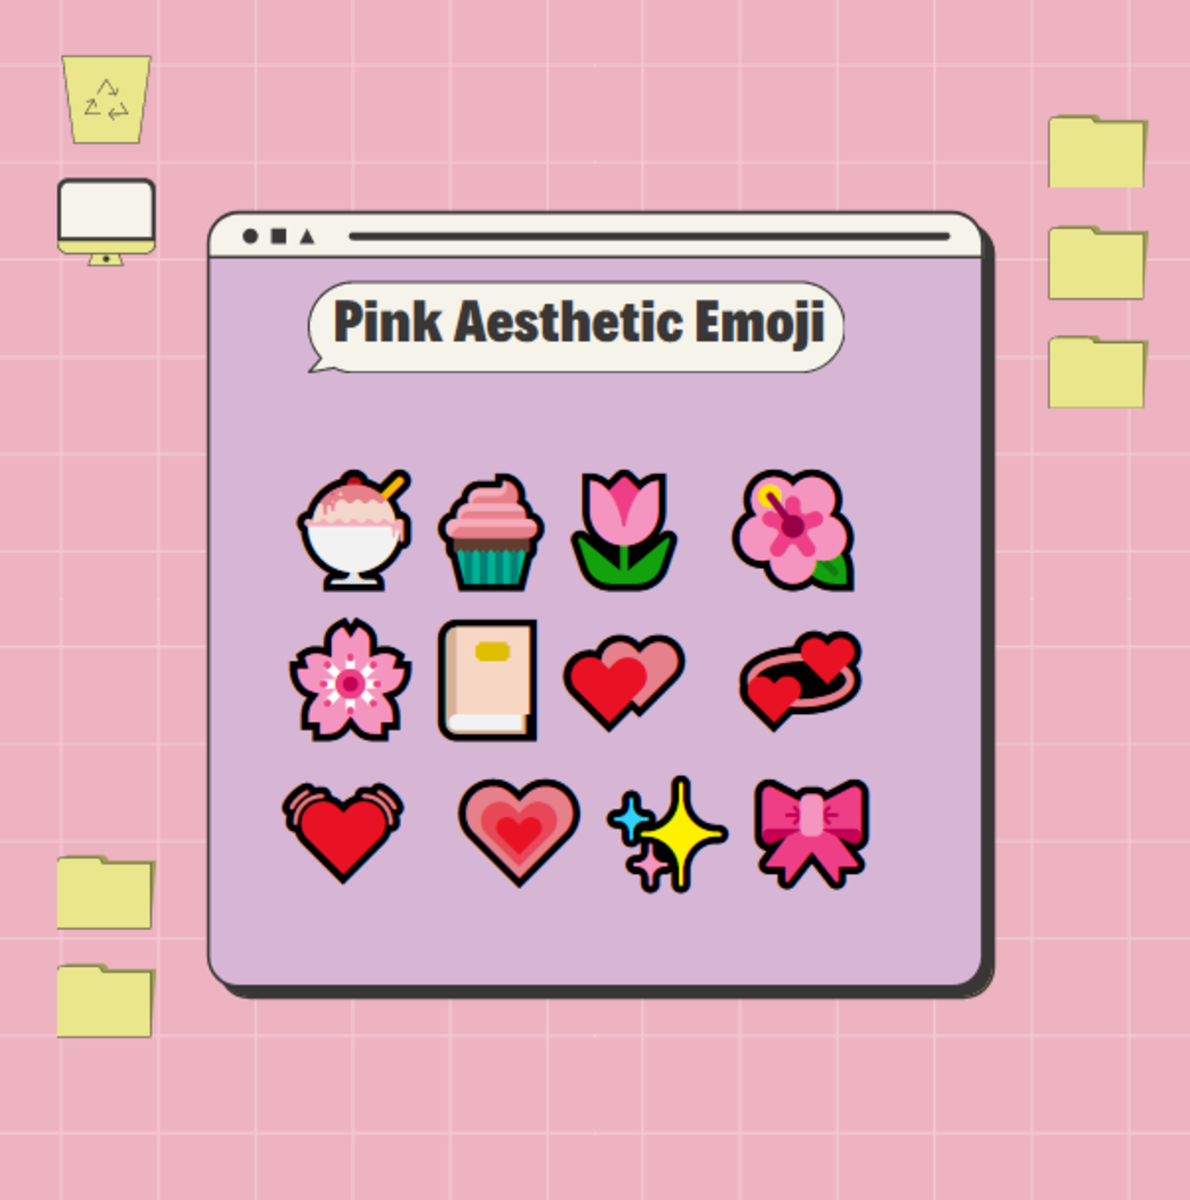 Here are some super cute pink aesthetic emoji!